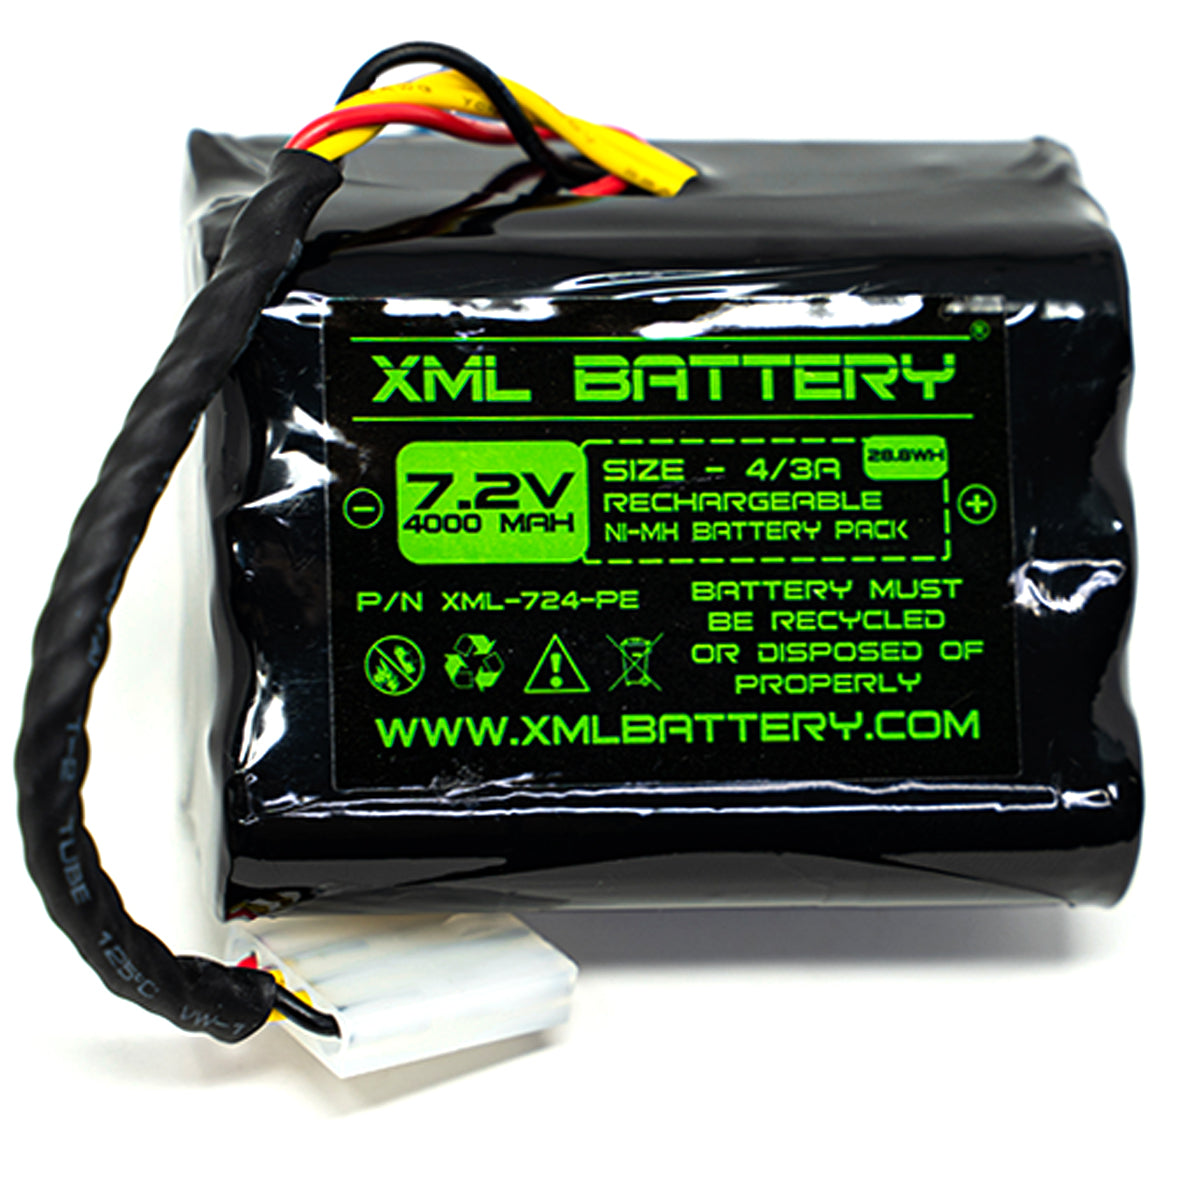 platform Billedhugger svimmel 7.2v 4000mAh Rechargeable Ni-MH Battery Pack Replacement for Neato Vac –  XML Battery